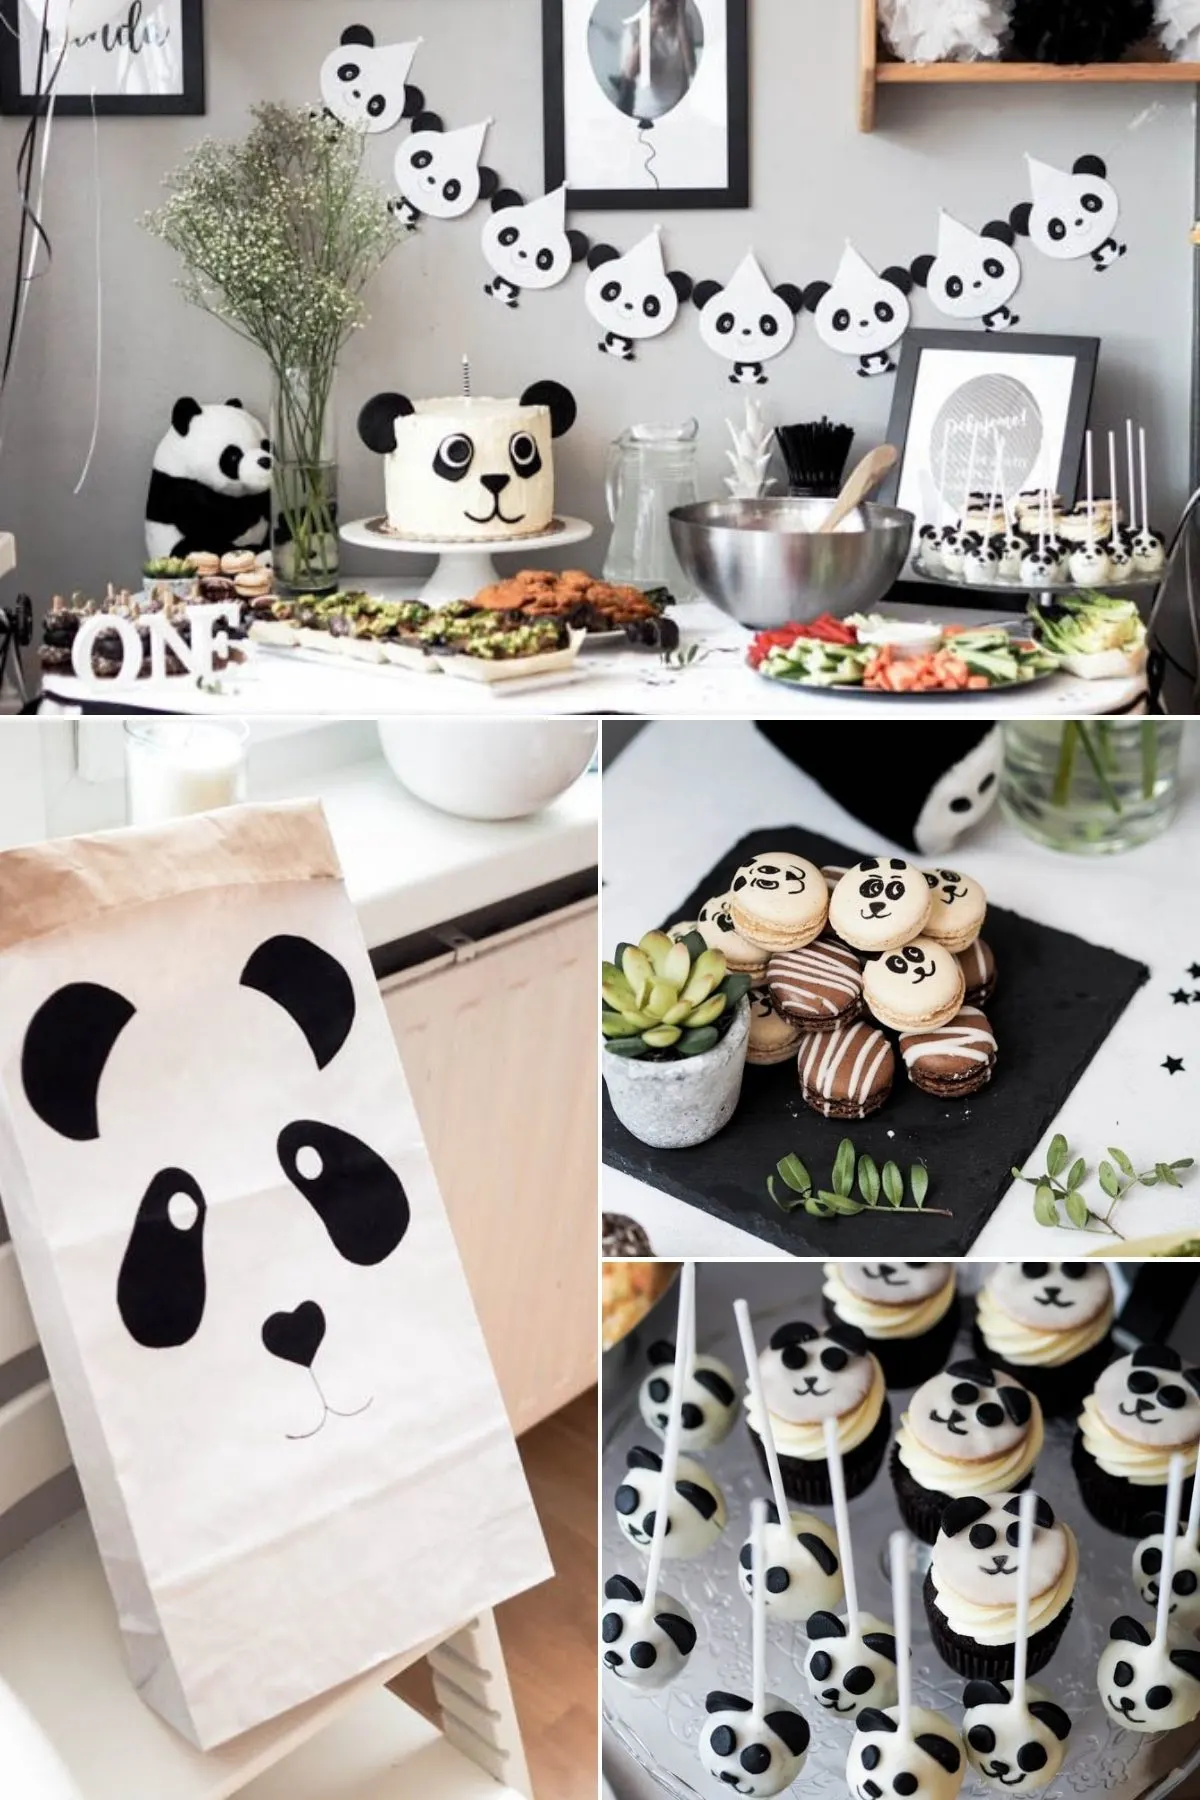 Collage of photos from panda first birthday party including food table, party bags, and panda pops.